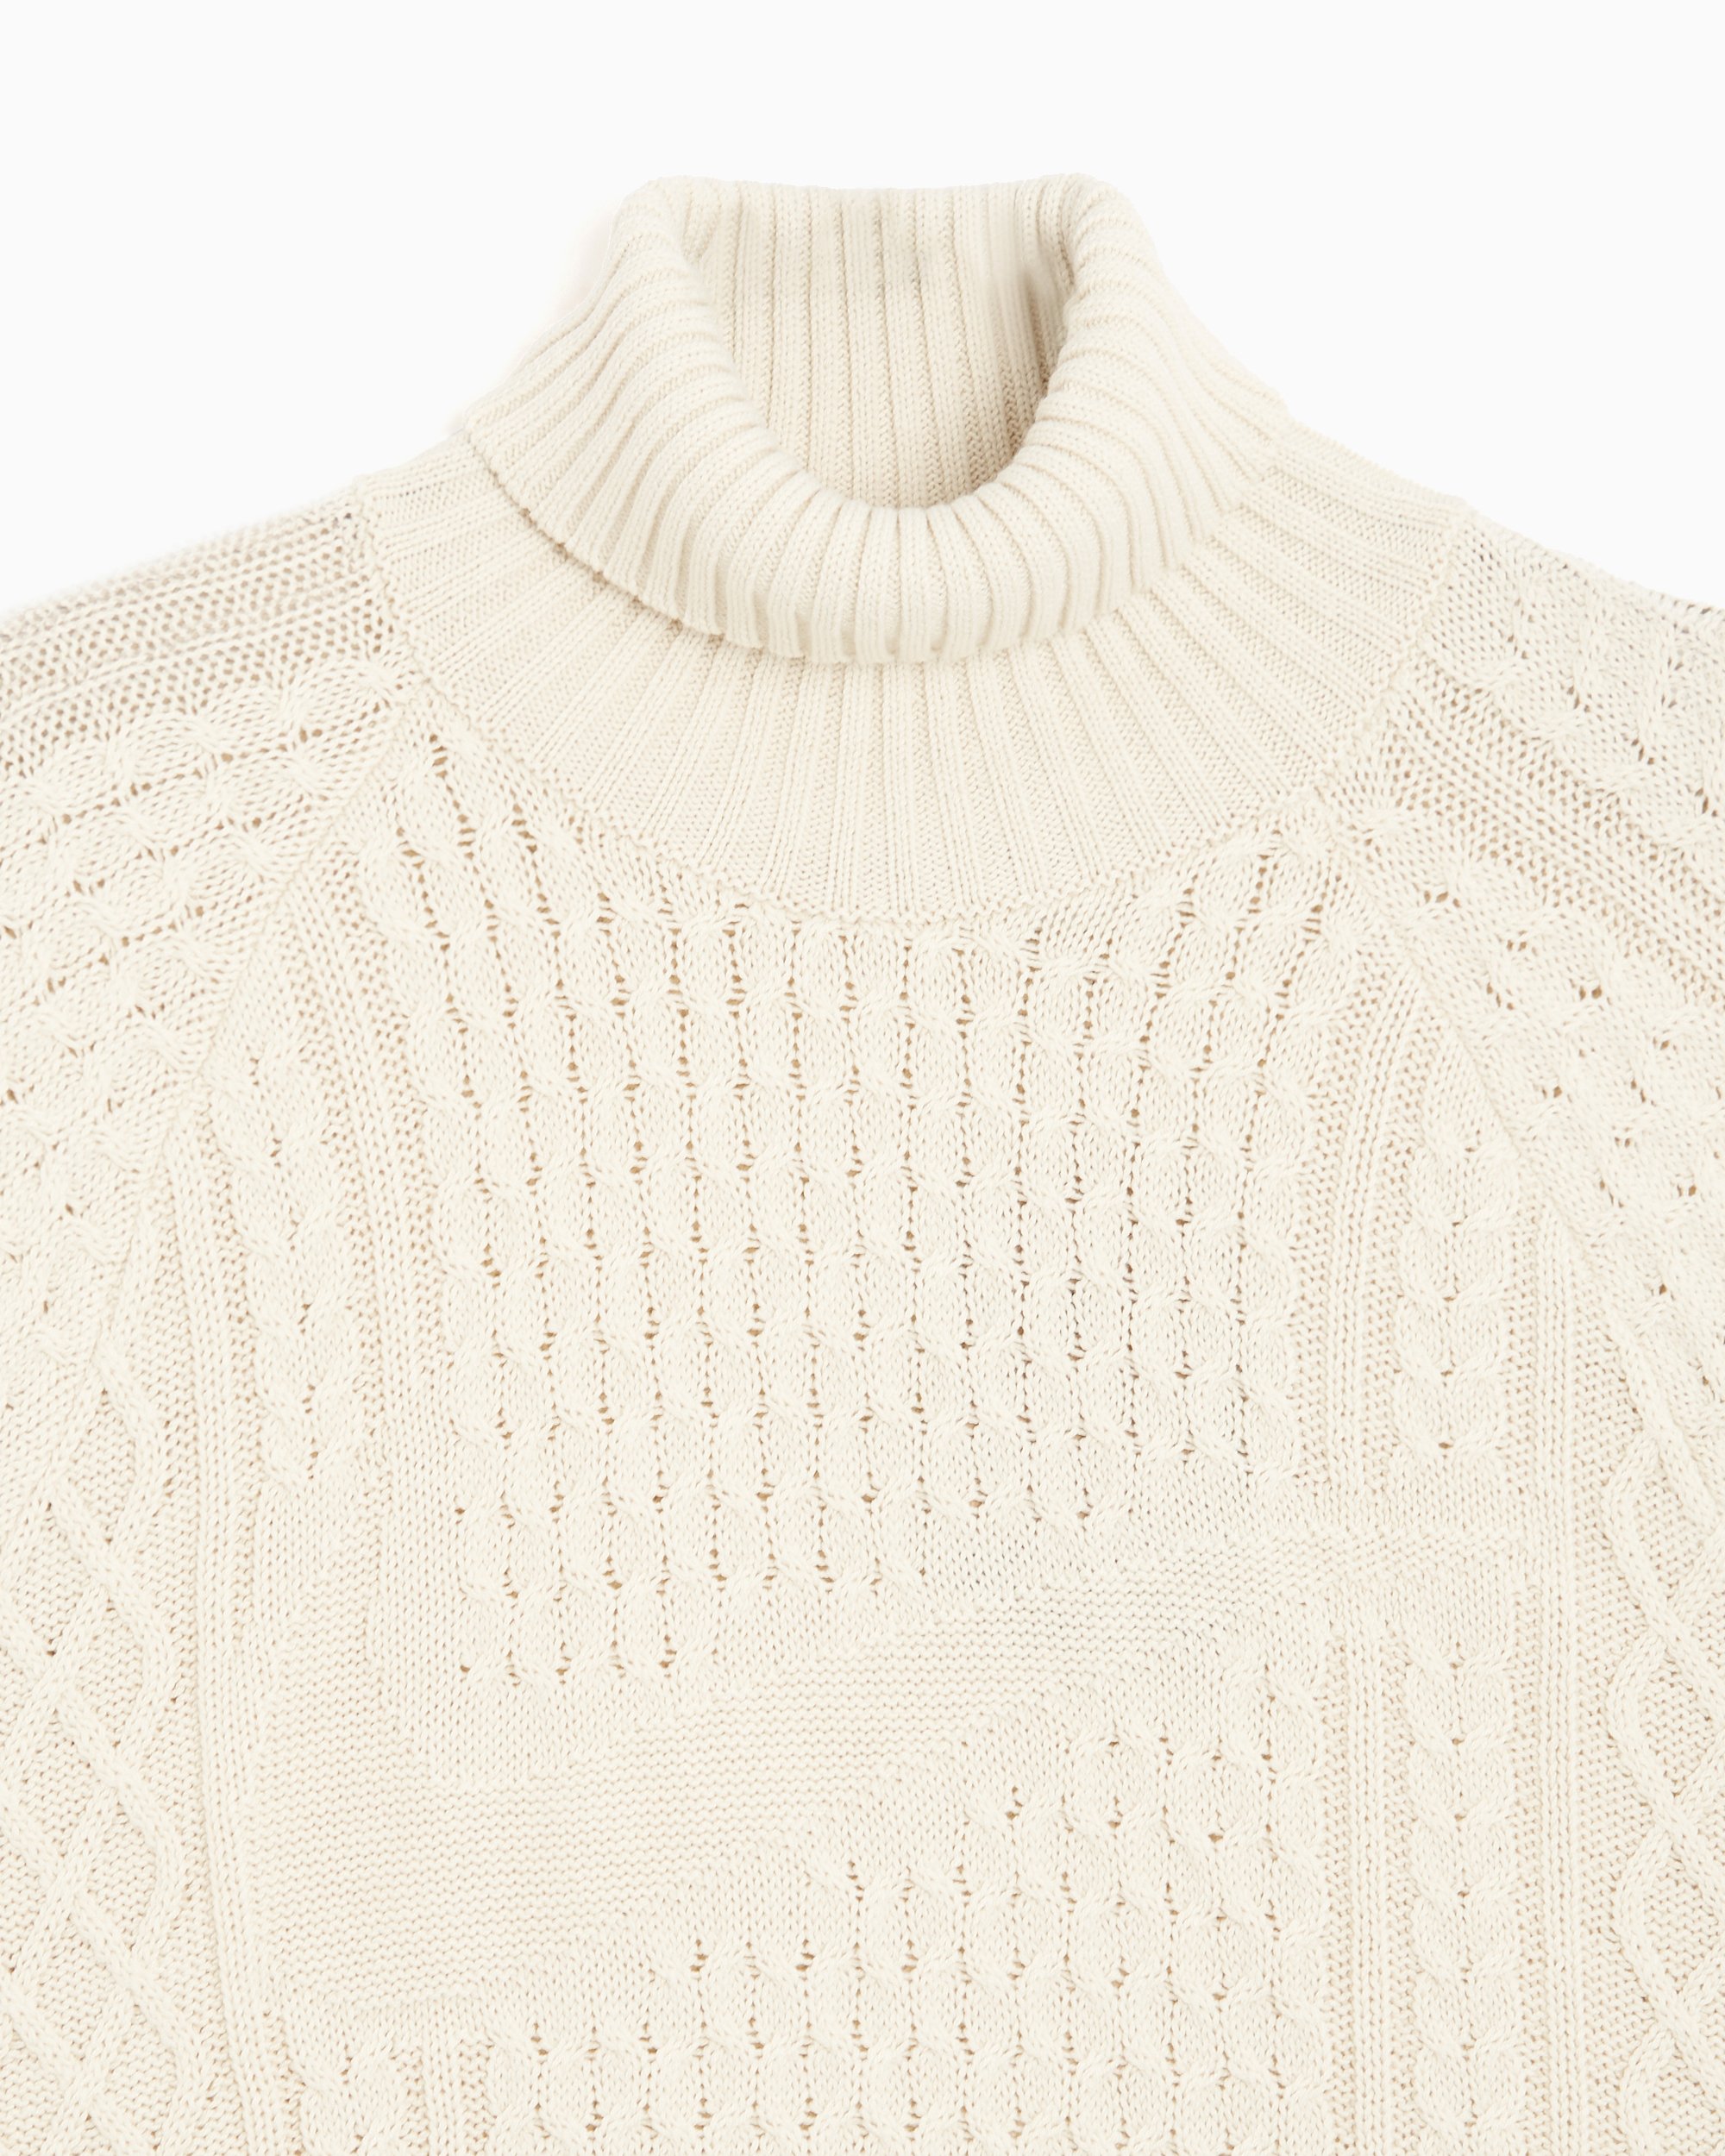 Nike Life Cable Knit Turtleneck Sweater - Fb7770-072